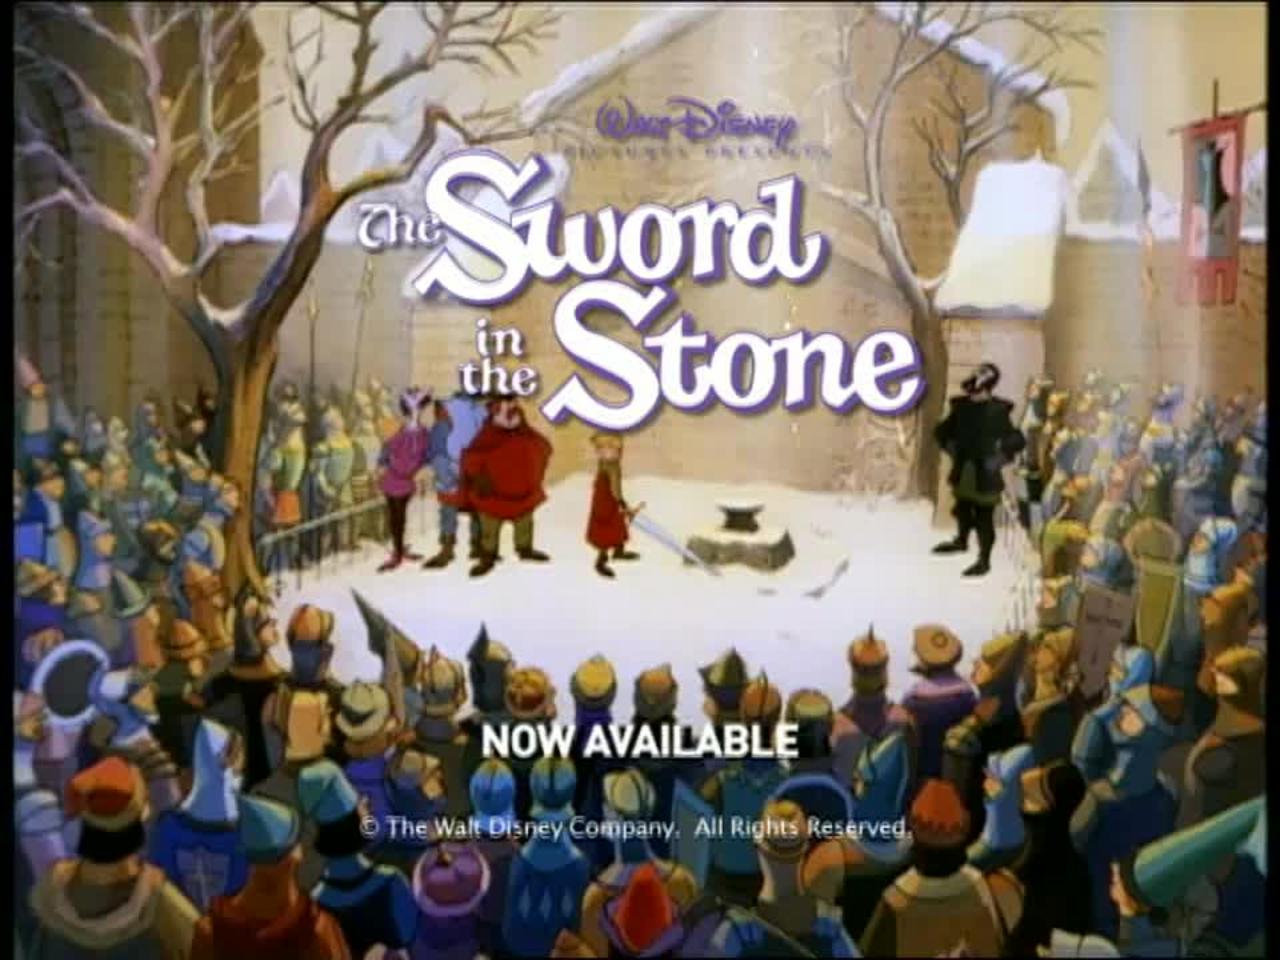 The Sword in the Stone // 1963 American animated musical comedy film trailer